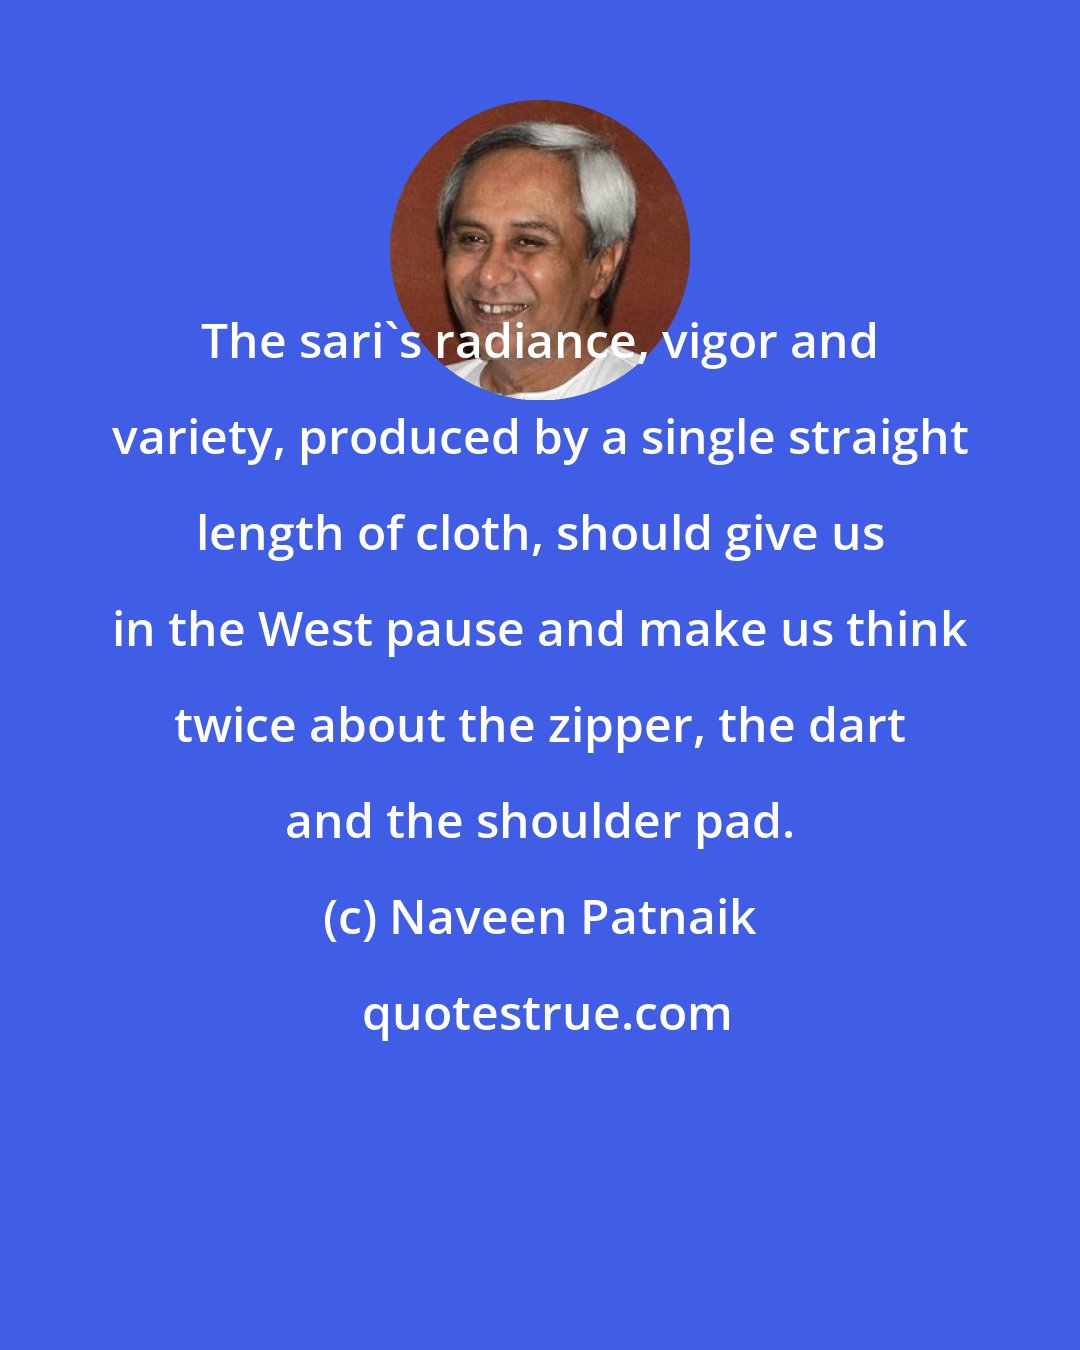 Naveen Patnaik: The sari's radiance, vigor and variety, produced by a single straight length of cloth, should give us in the West pause and make us think twice about the zipper, the dart and the shoulder pad.